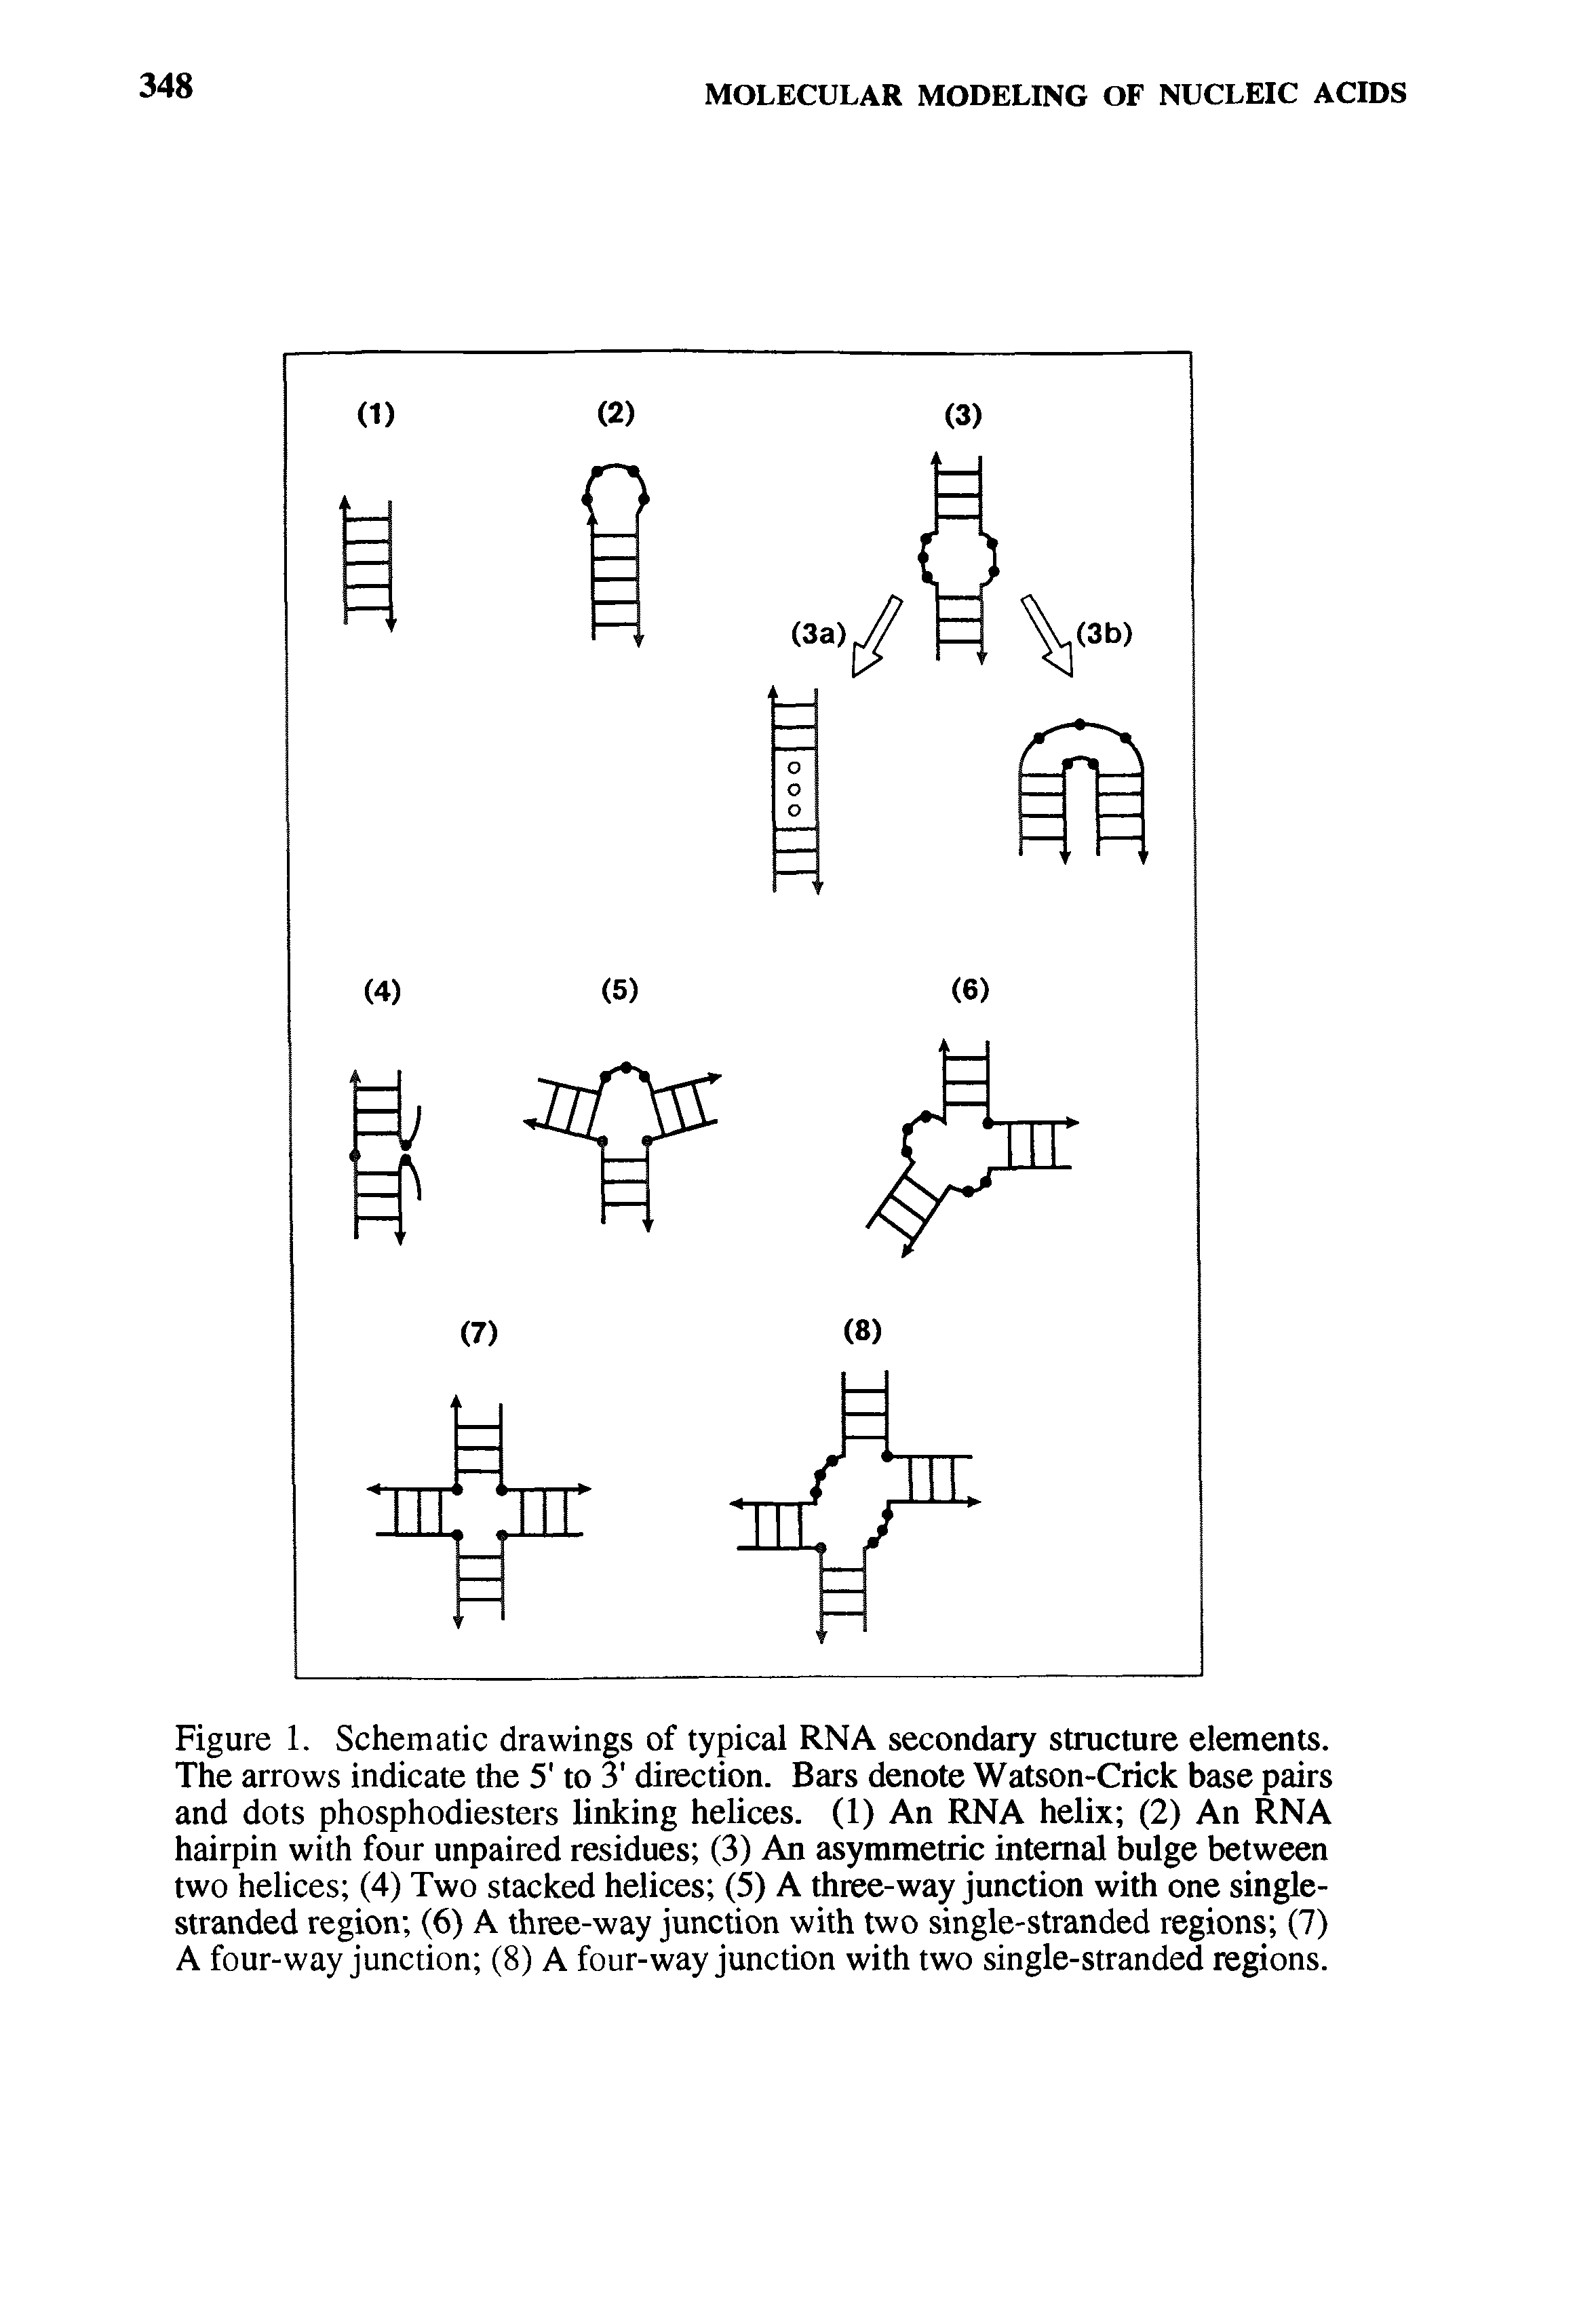 Figure 1. Schematic drawings of typical RNA secondary structure elements. The arrows indicate the 5 to 3 direction. Bars denote Watson-Crick base pairs and dots phosphodiesters linking helices. (1) An RNA helix (2) An RNA hairpin with four unpaired residues (3) An asymmetric internal bidge between two helices (4) Two stacked helices (5) A three-way junction with one single-stranded region (6) A three-way junction with two single-stranded regions (7) A four-way junction (8) A four-way junction with two single-stranded regions.